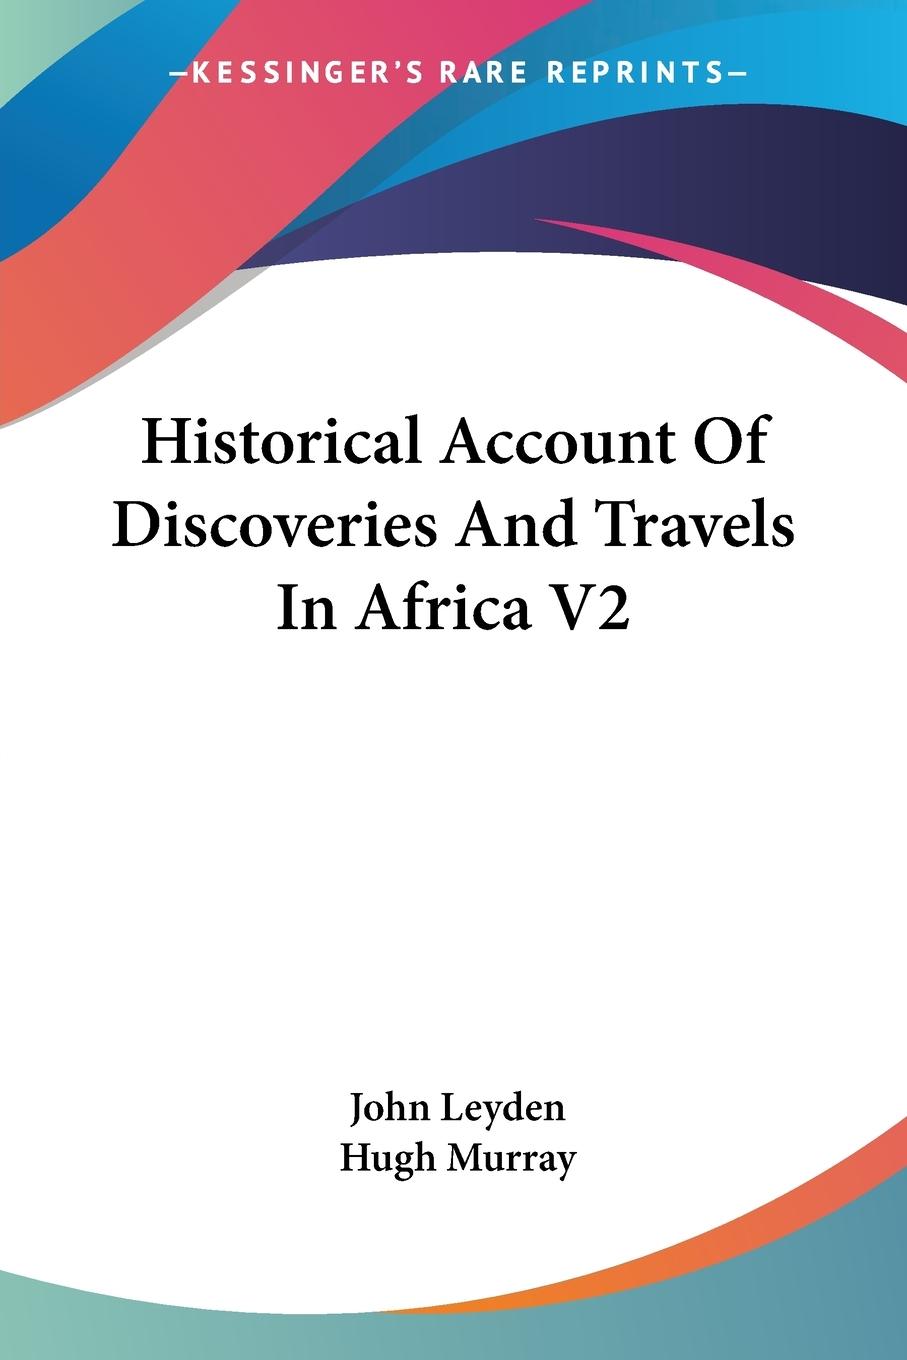 Historical Account Of Discoveries And Travels In Africa V2 - Leyden, John Murray, Hugh